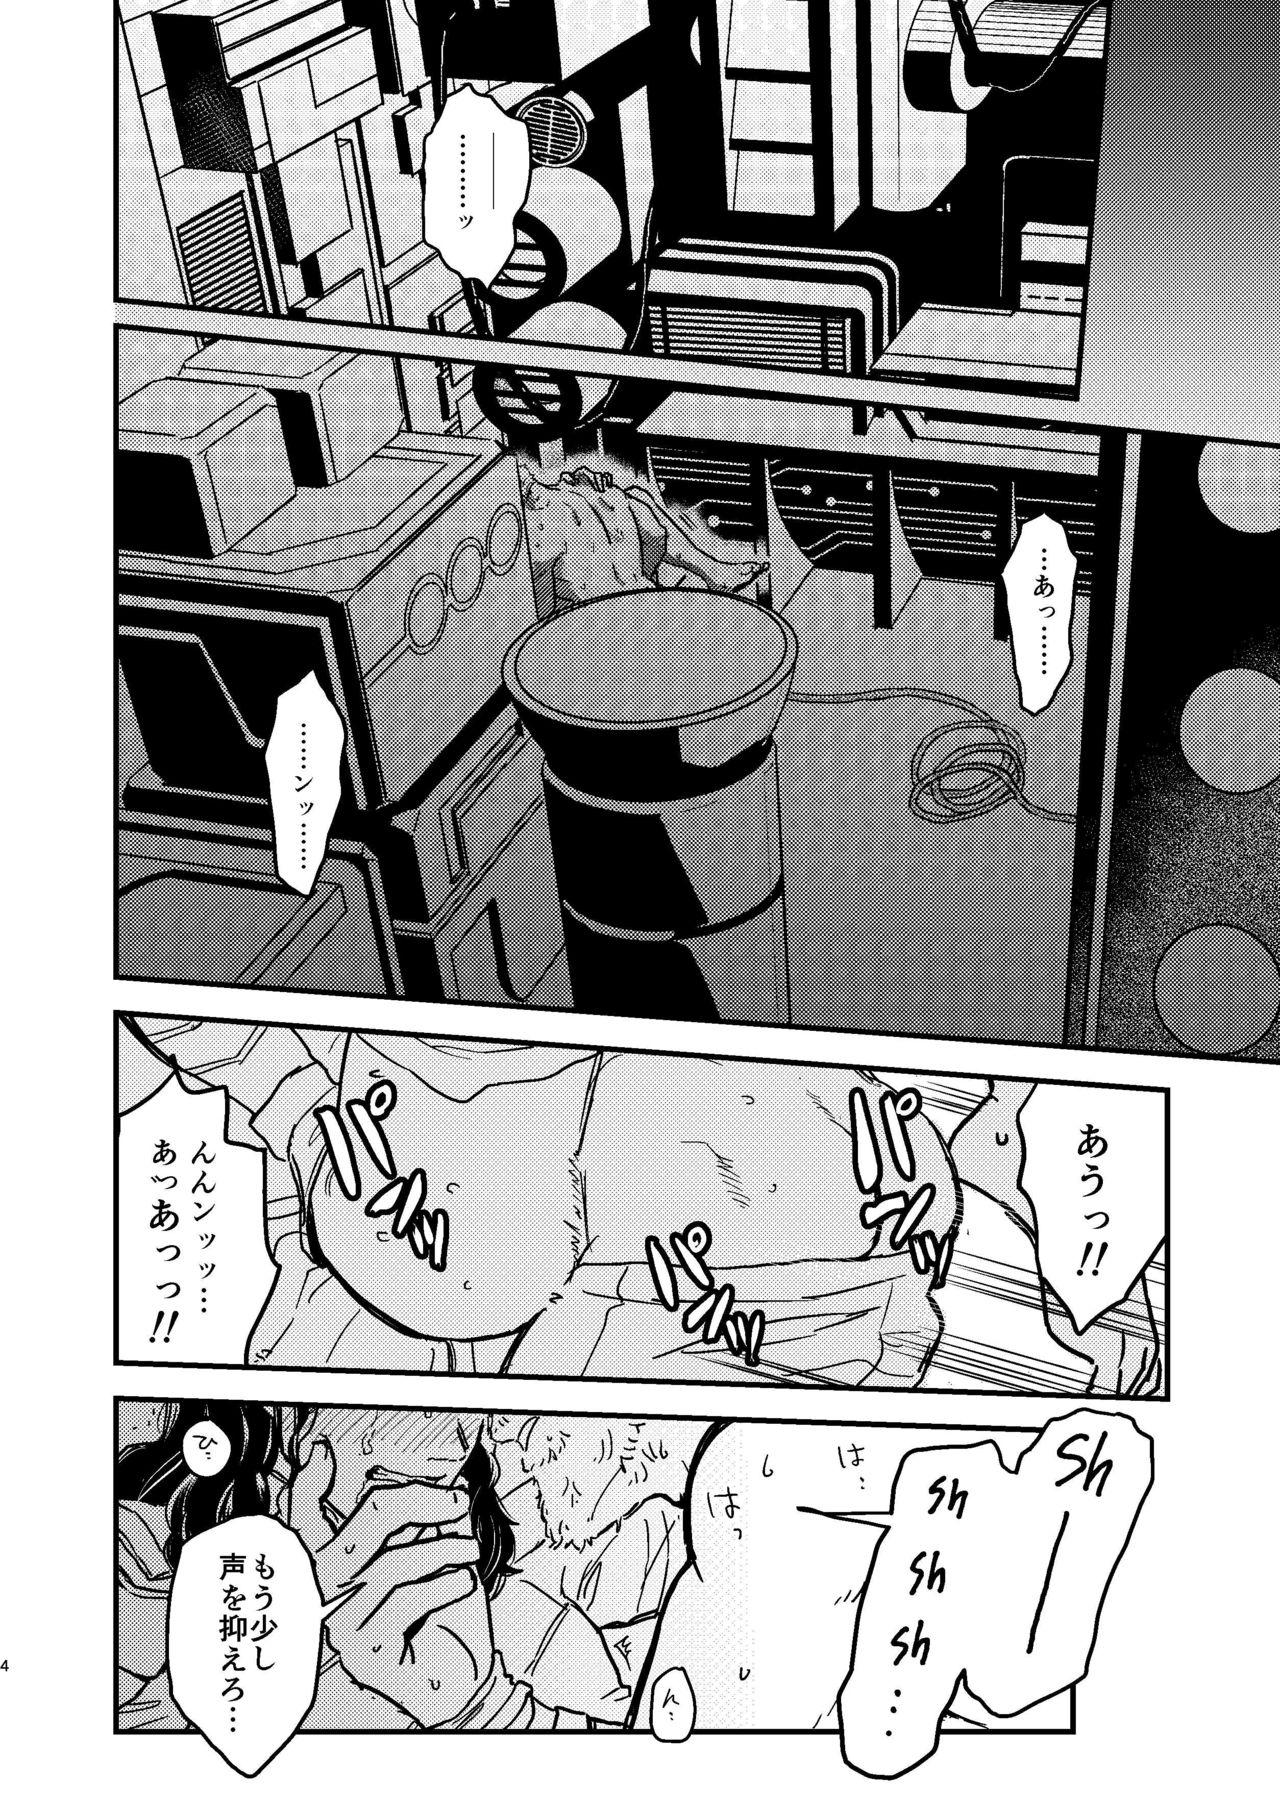 Tanned Sore o Nanto Yobebaii - What should I call it? - Avengers Stepfamily - Page 5